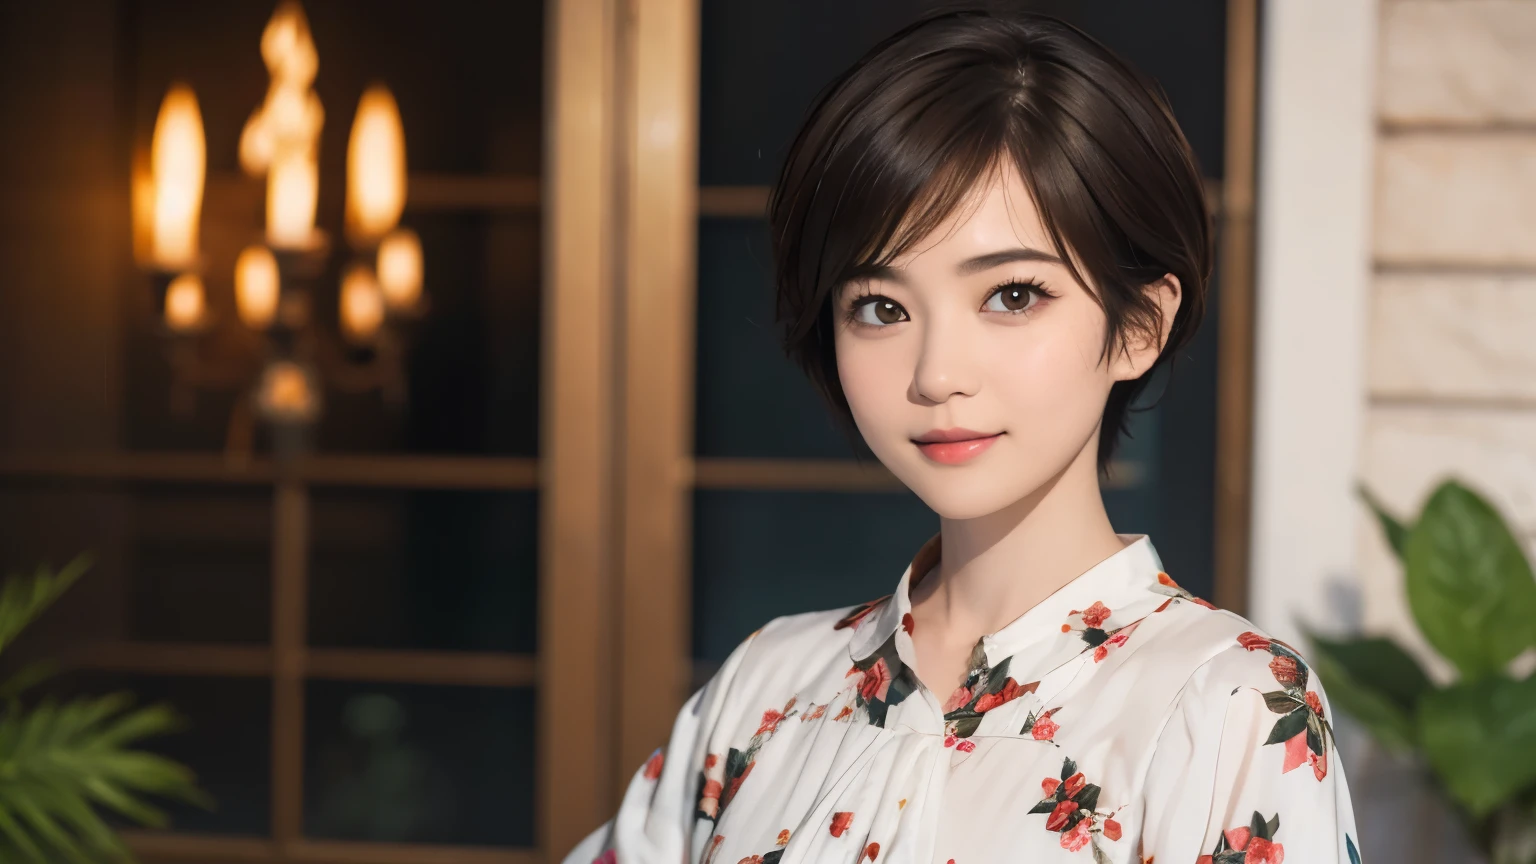 148
(20 year old woman,floral print outfit), (Super realistic), (high resolution), ((beautiful hairstyle 46)), ((short hair:1.46)), (gentle smile), (brest:1.1), (lipstick)
